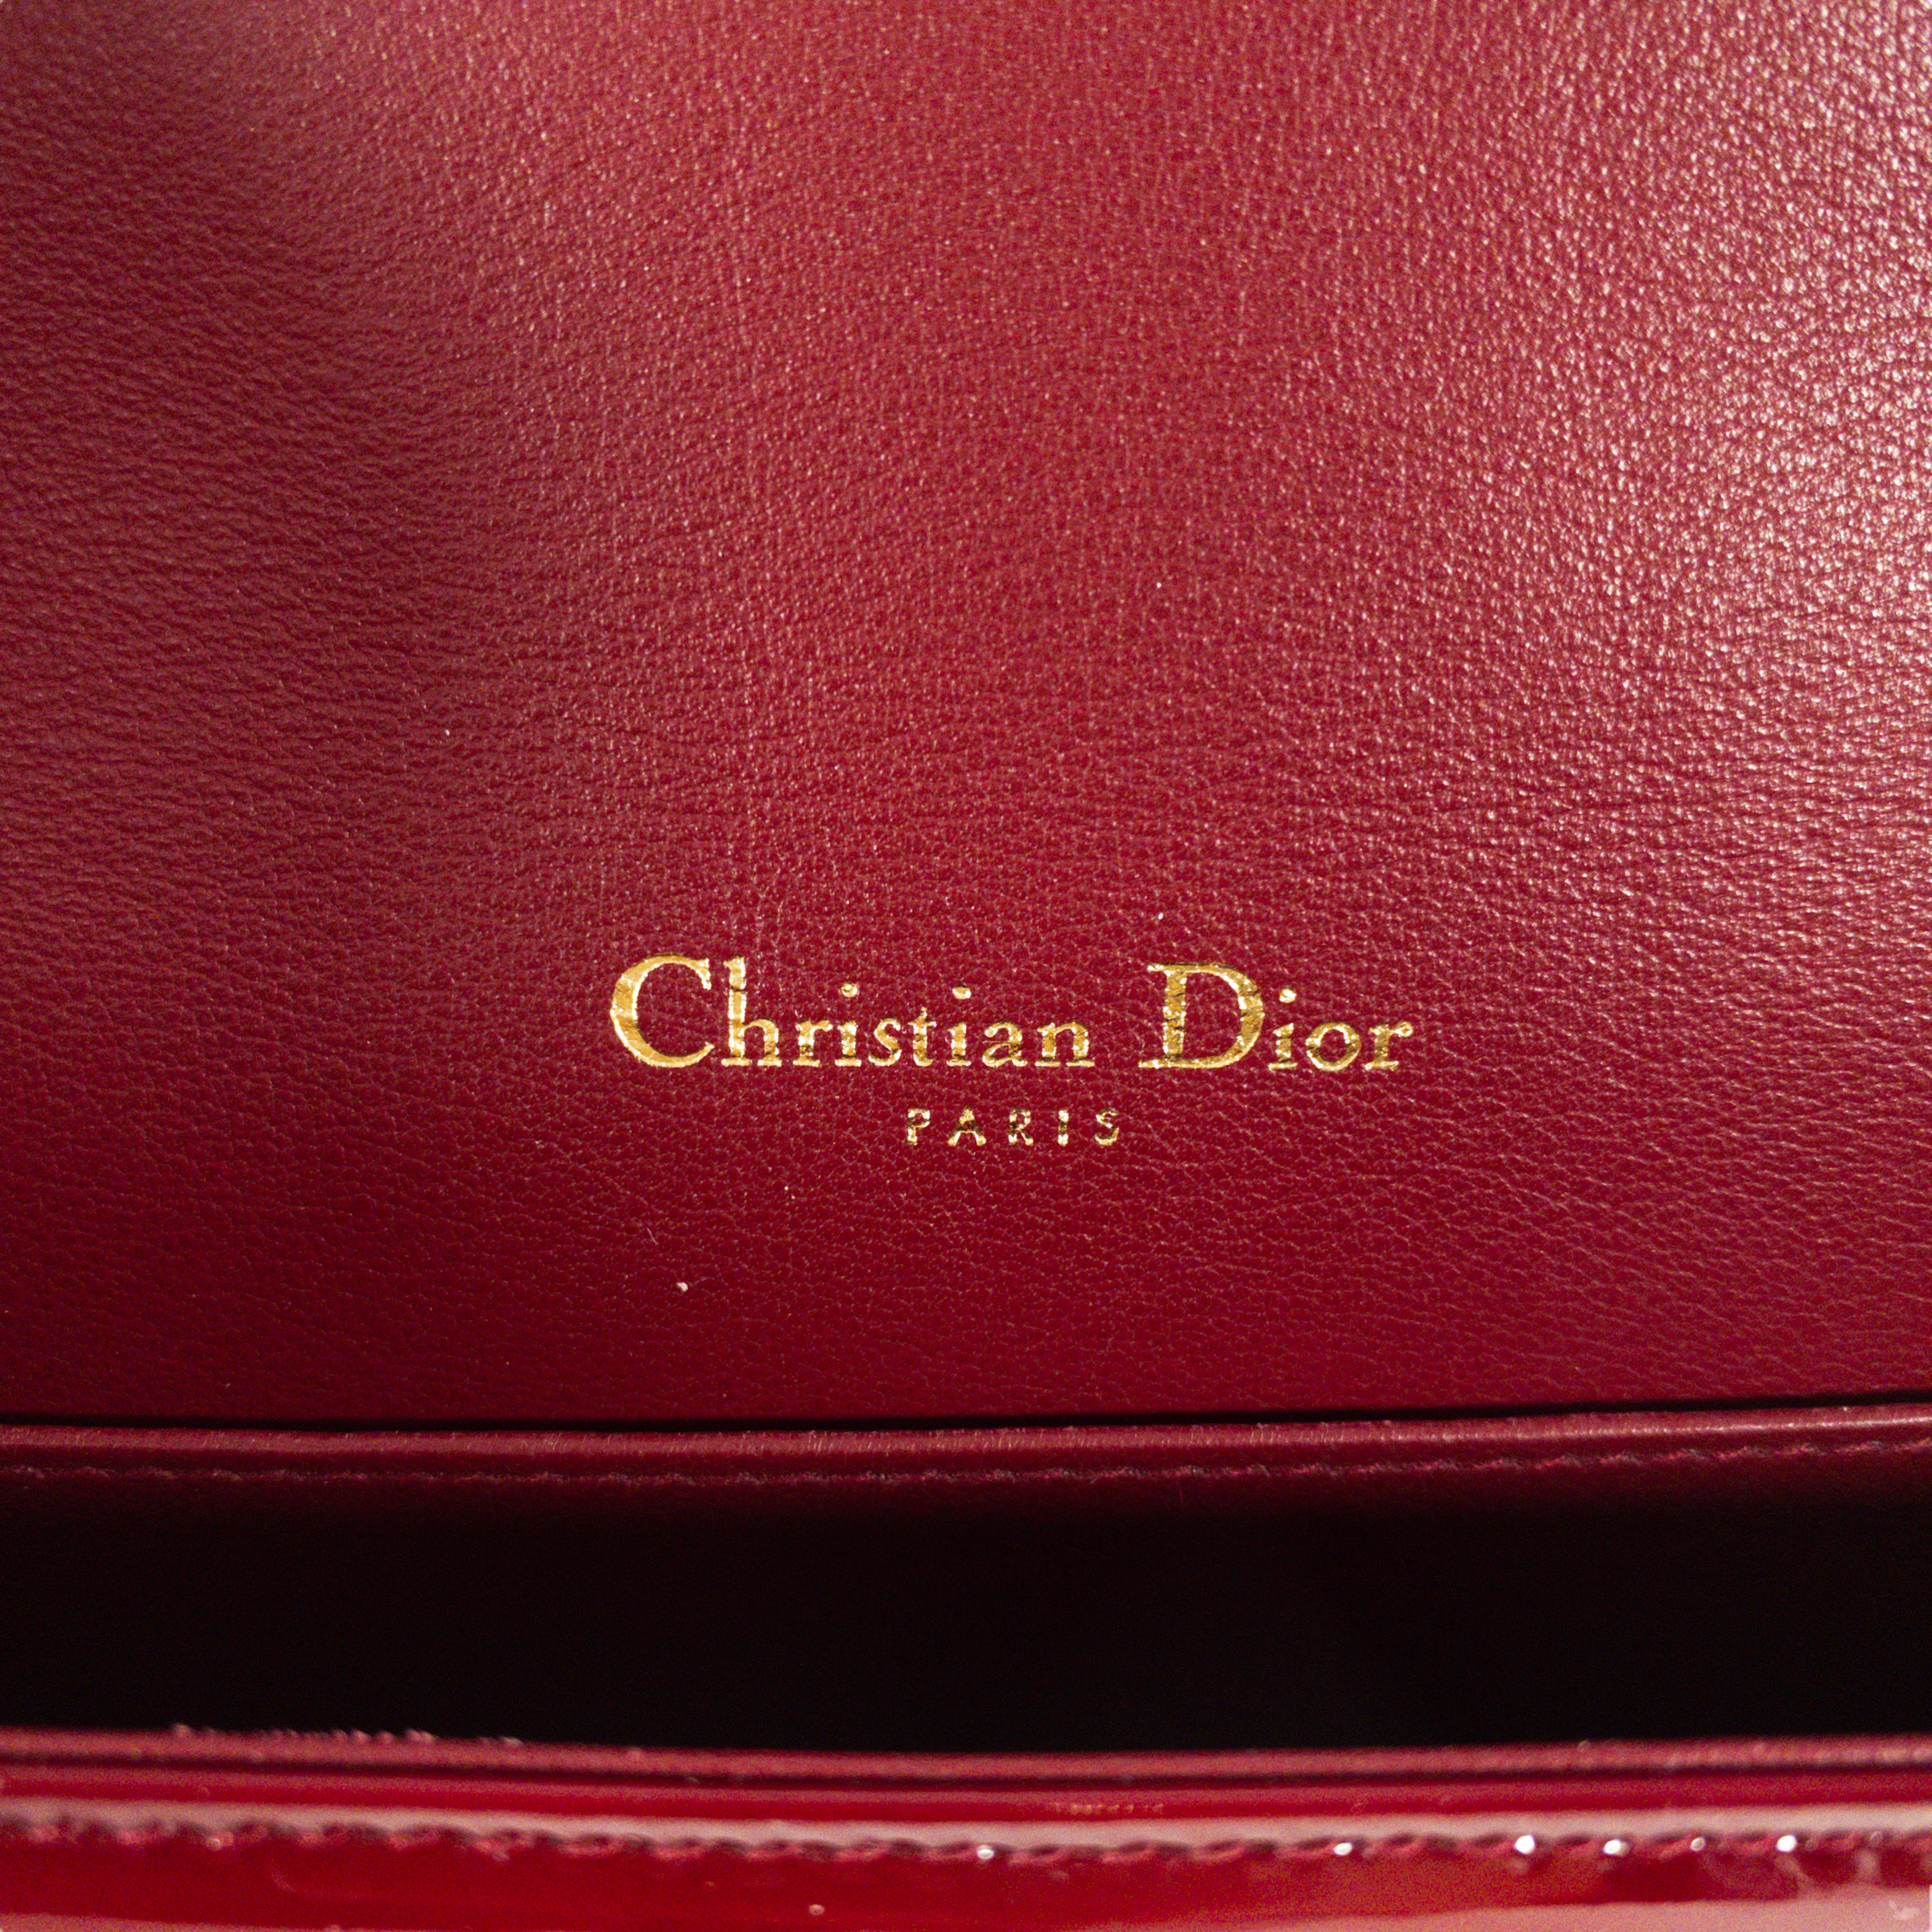 Dior Red Patent Lady Dior Chain Wallet